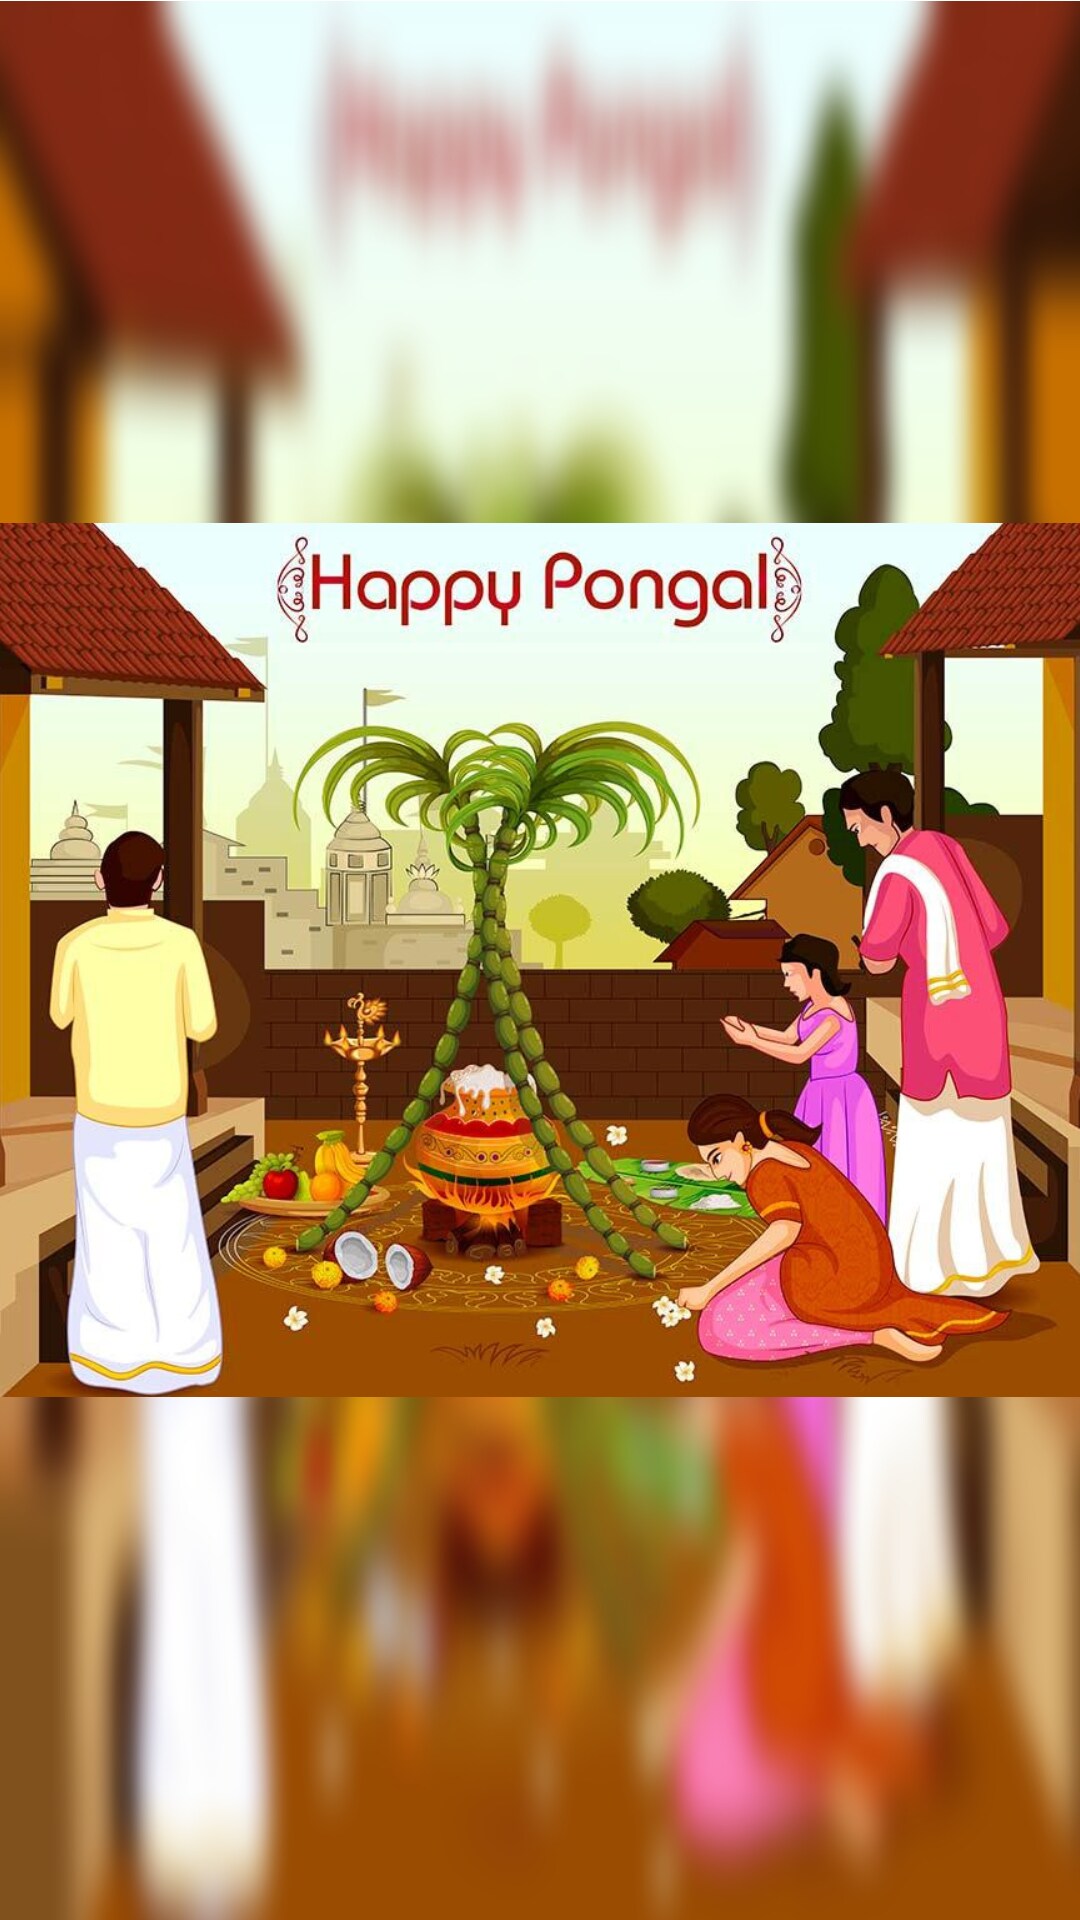 How has the Pongal festival evolved over time in terms of cultural  practices and traditions? - Quora